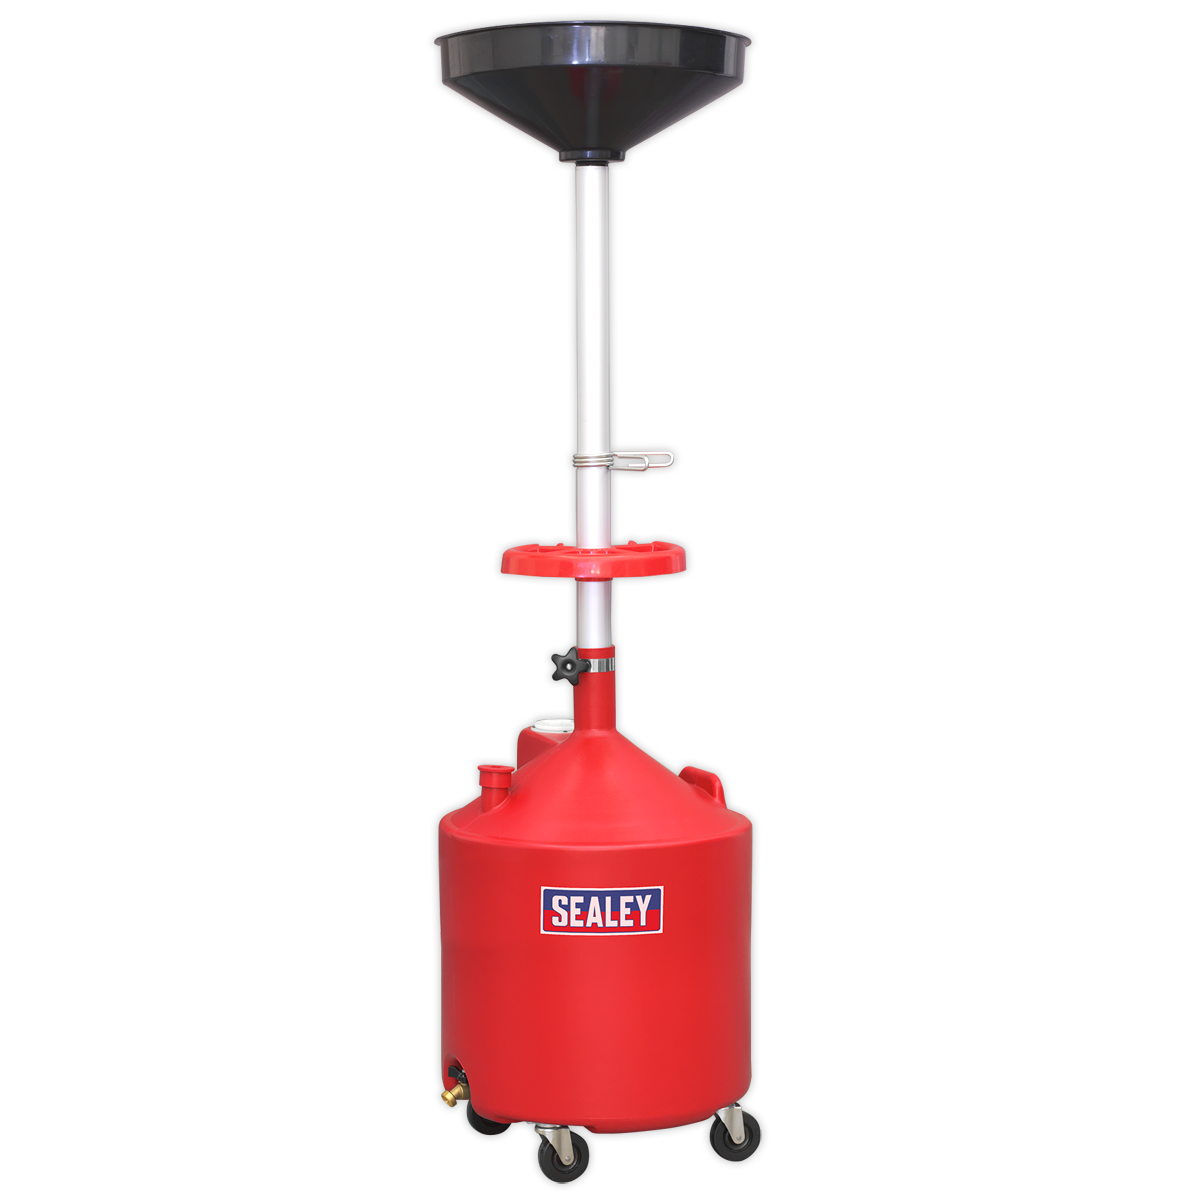 Sealey 80L Mobile Oil Drainer Gravity Discharge AK80D